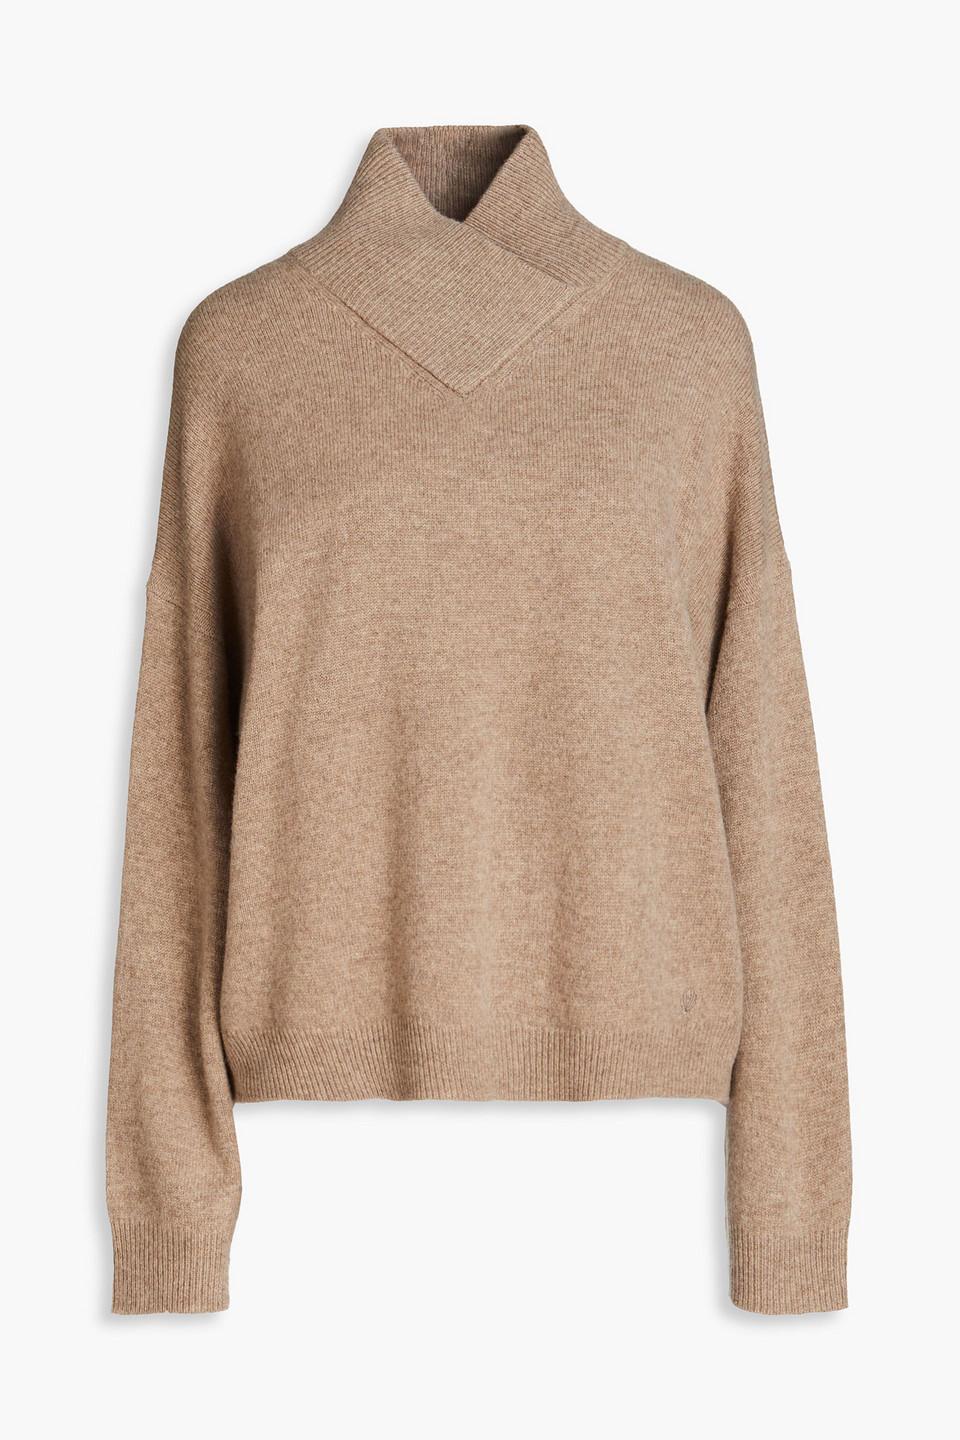 Loulou Studio Yak And Wool-blend Turtleneck Sweater in Natural